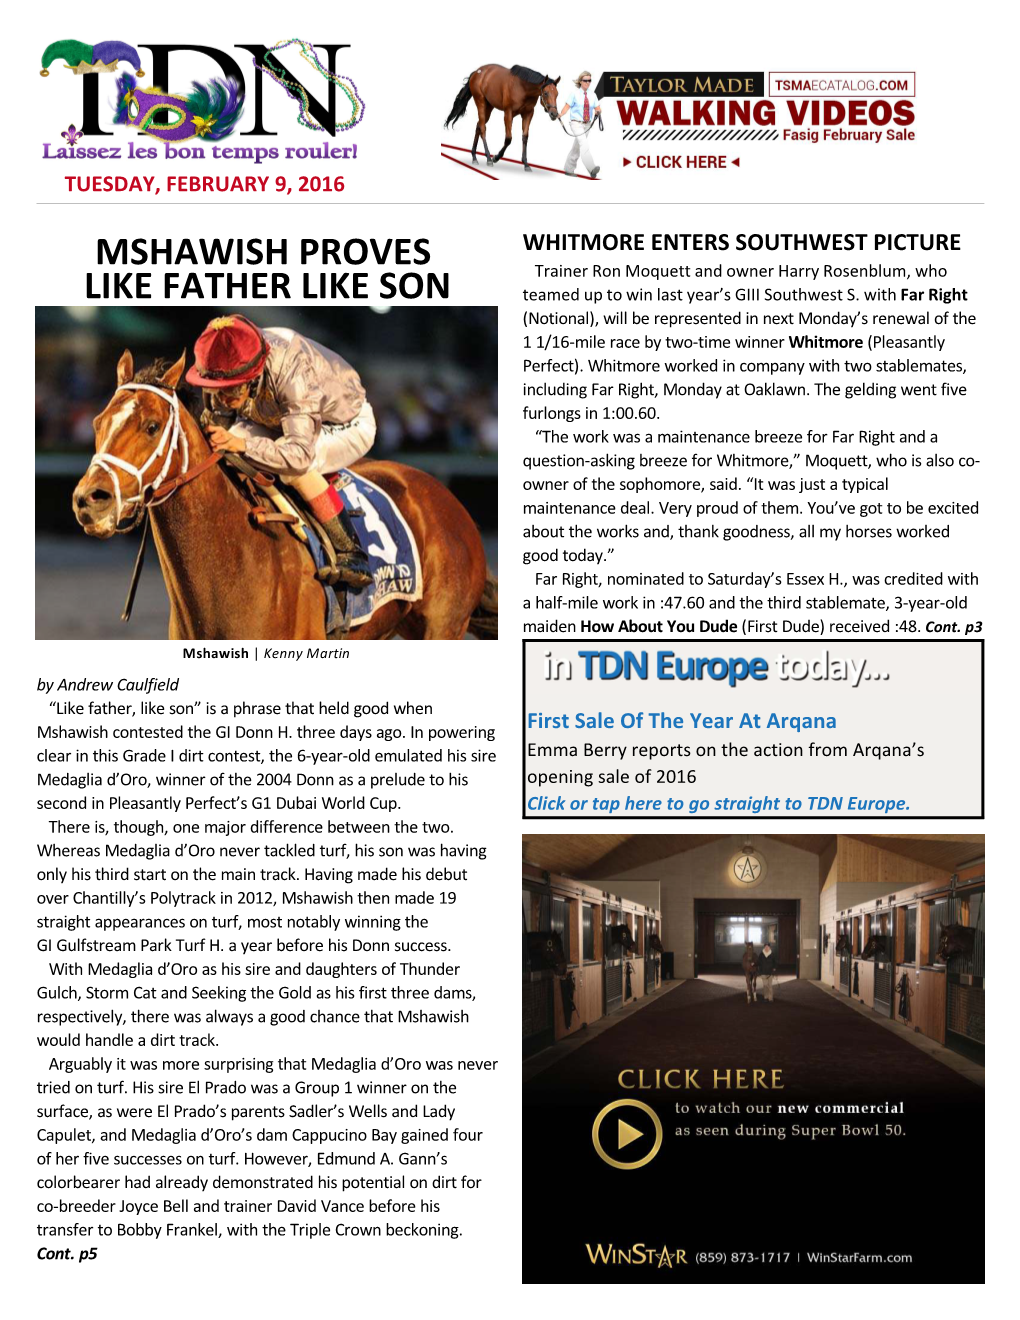 MSHAWISH PROVES Trainer Ron Moquett and Owner Harry Rosenblum, Who LIKE FATHER LIKE SON Teamed up to Win Last Year’S GIII Southwest S